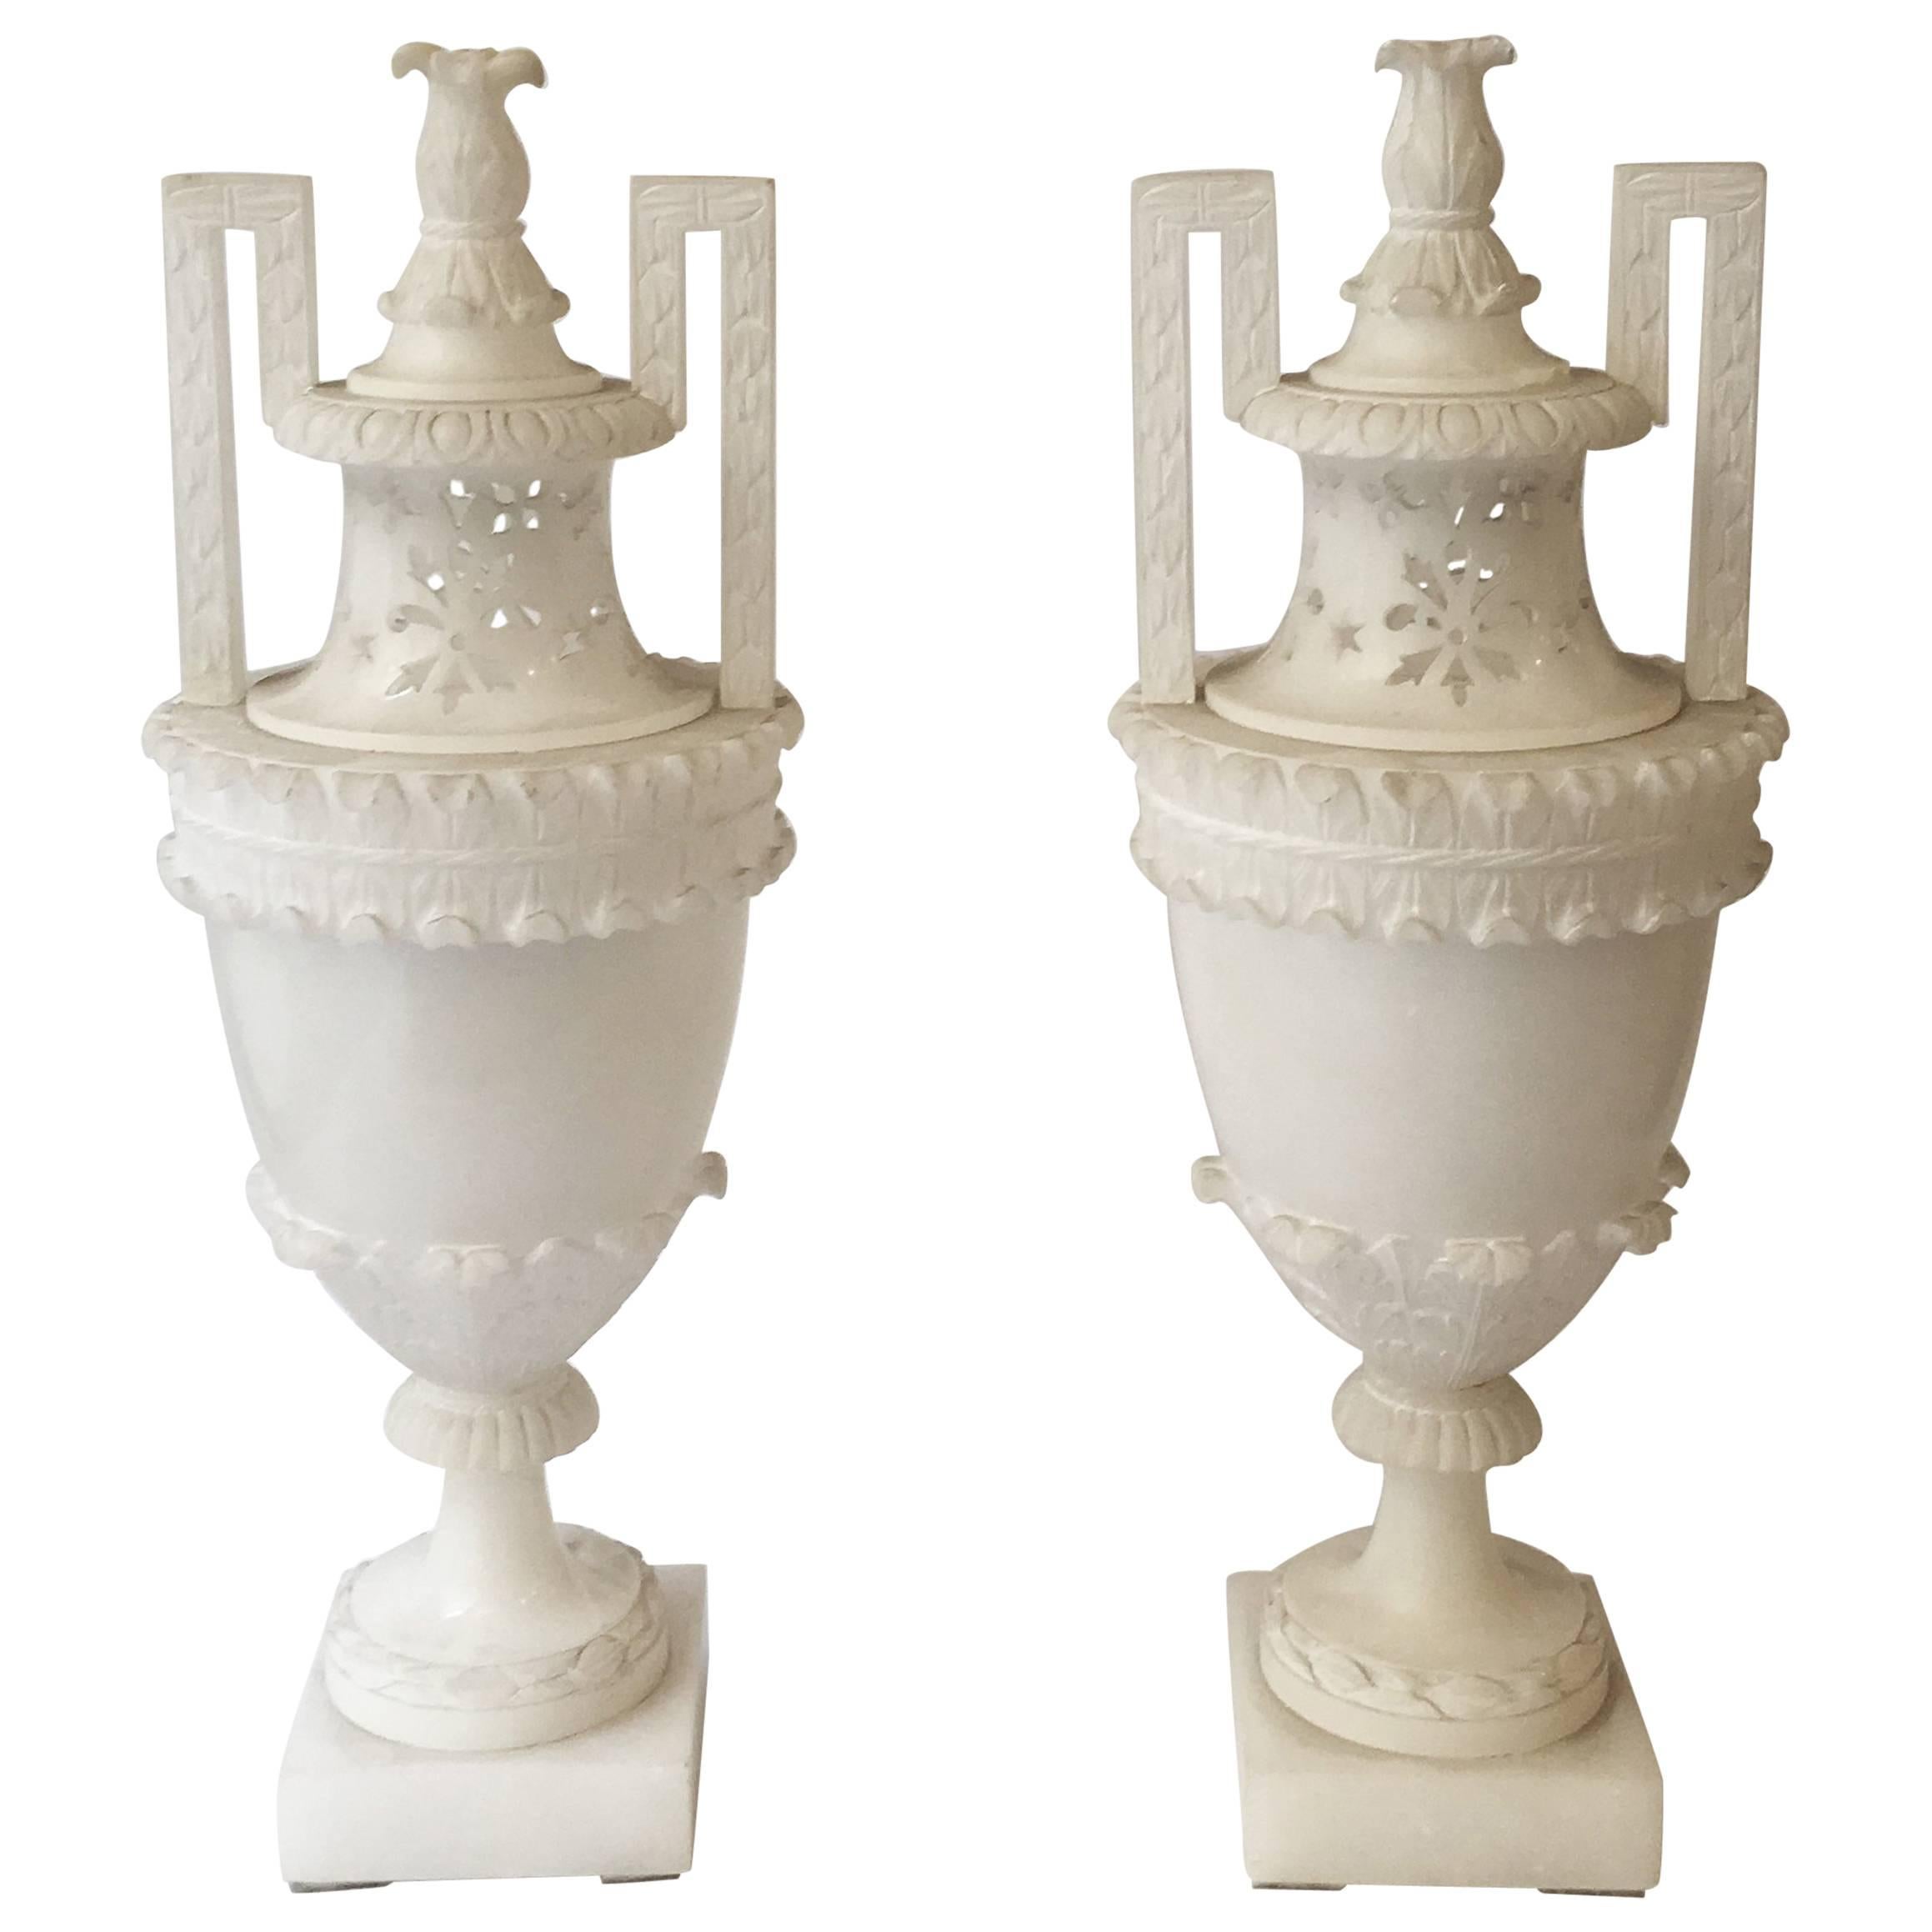 19th Century Italian Pair of Hand-Carved Neoclassical Alabaster Vases or Urns For Sale